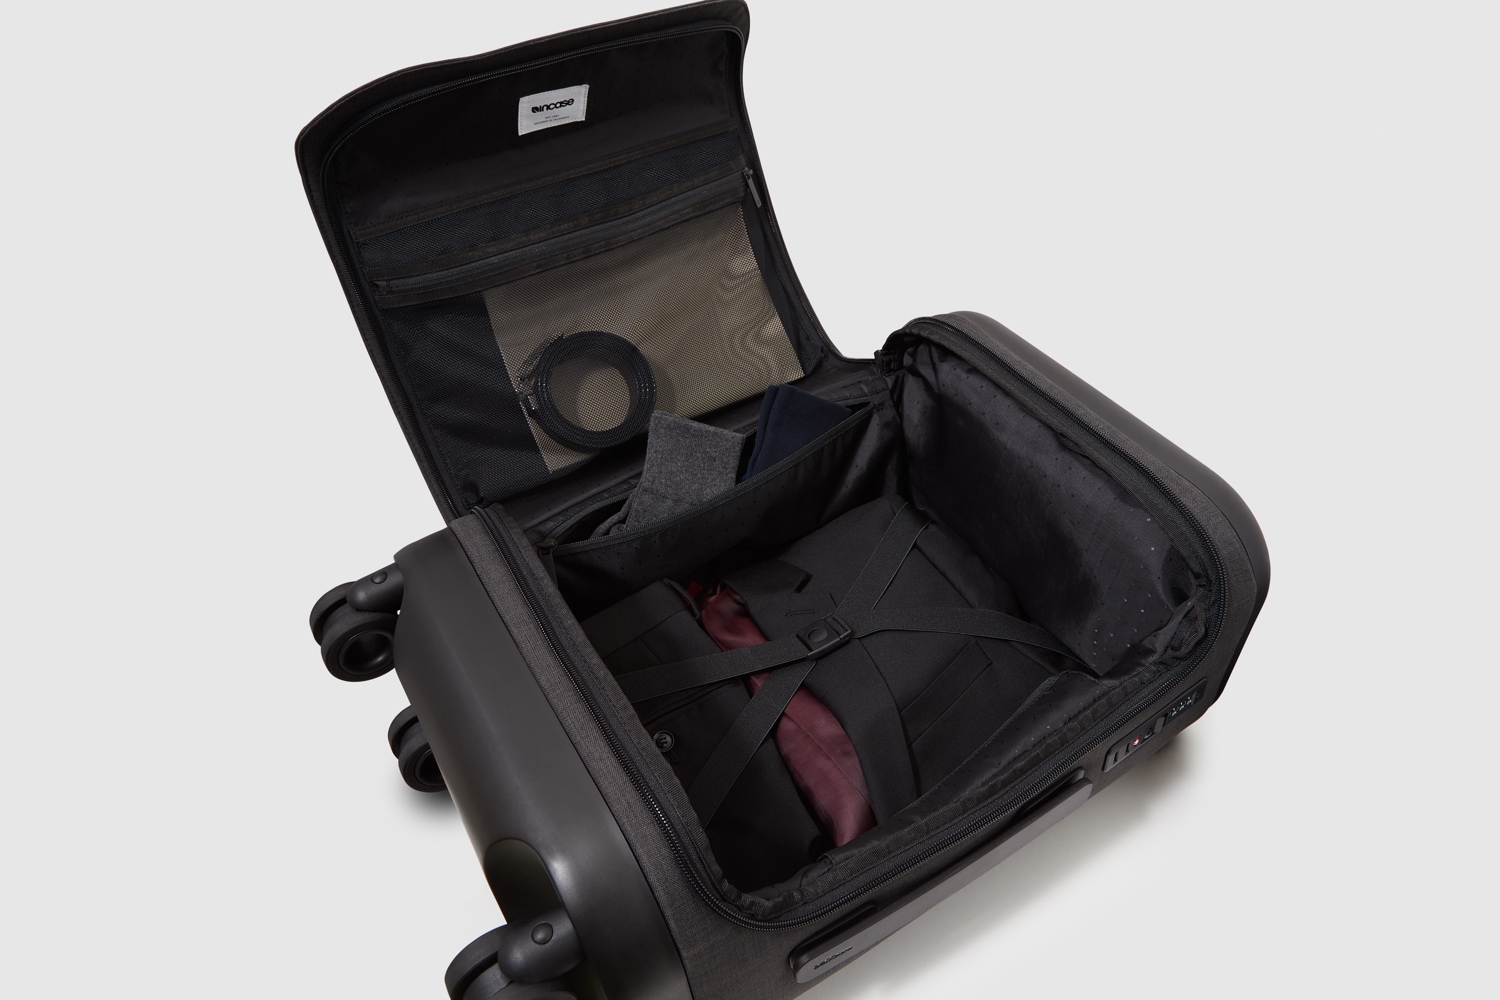 incase proconnected 4 wheel hubless roller smart luggage blends high design with large capacity battery studio0474